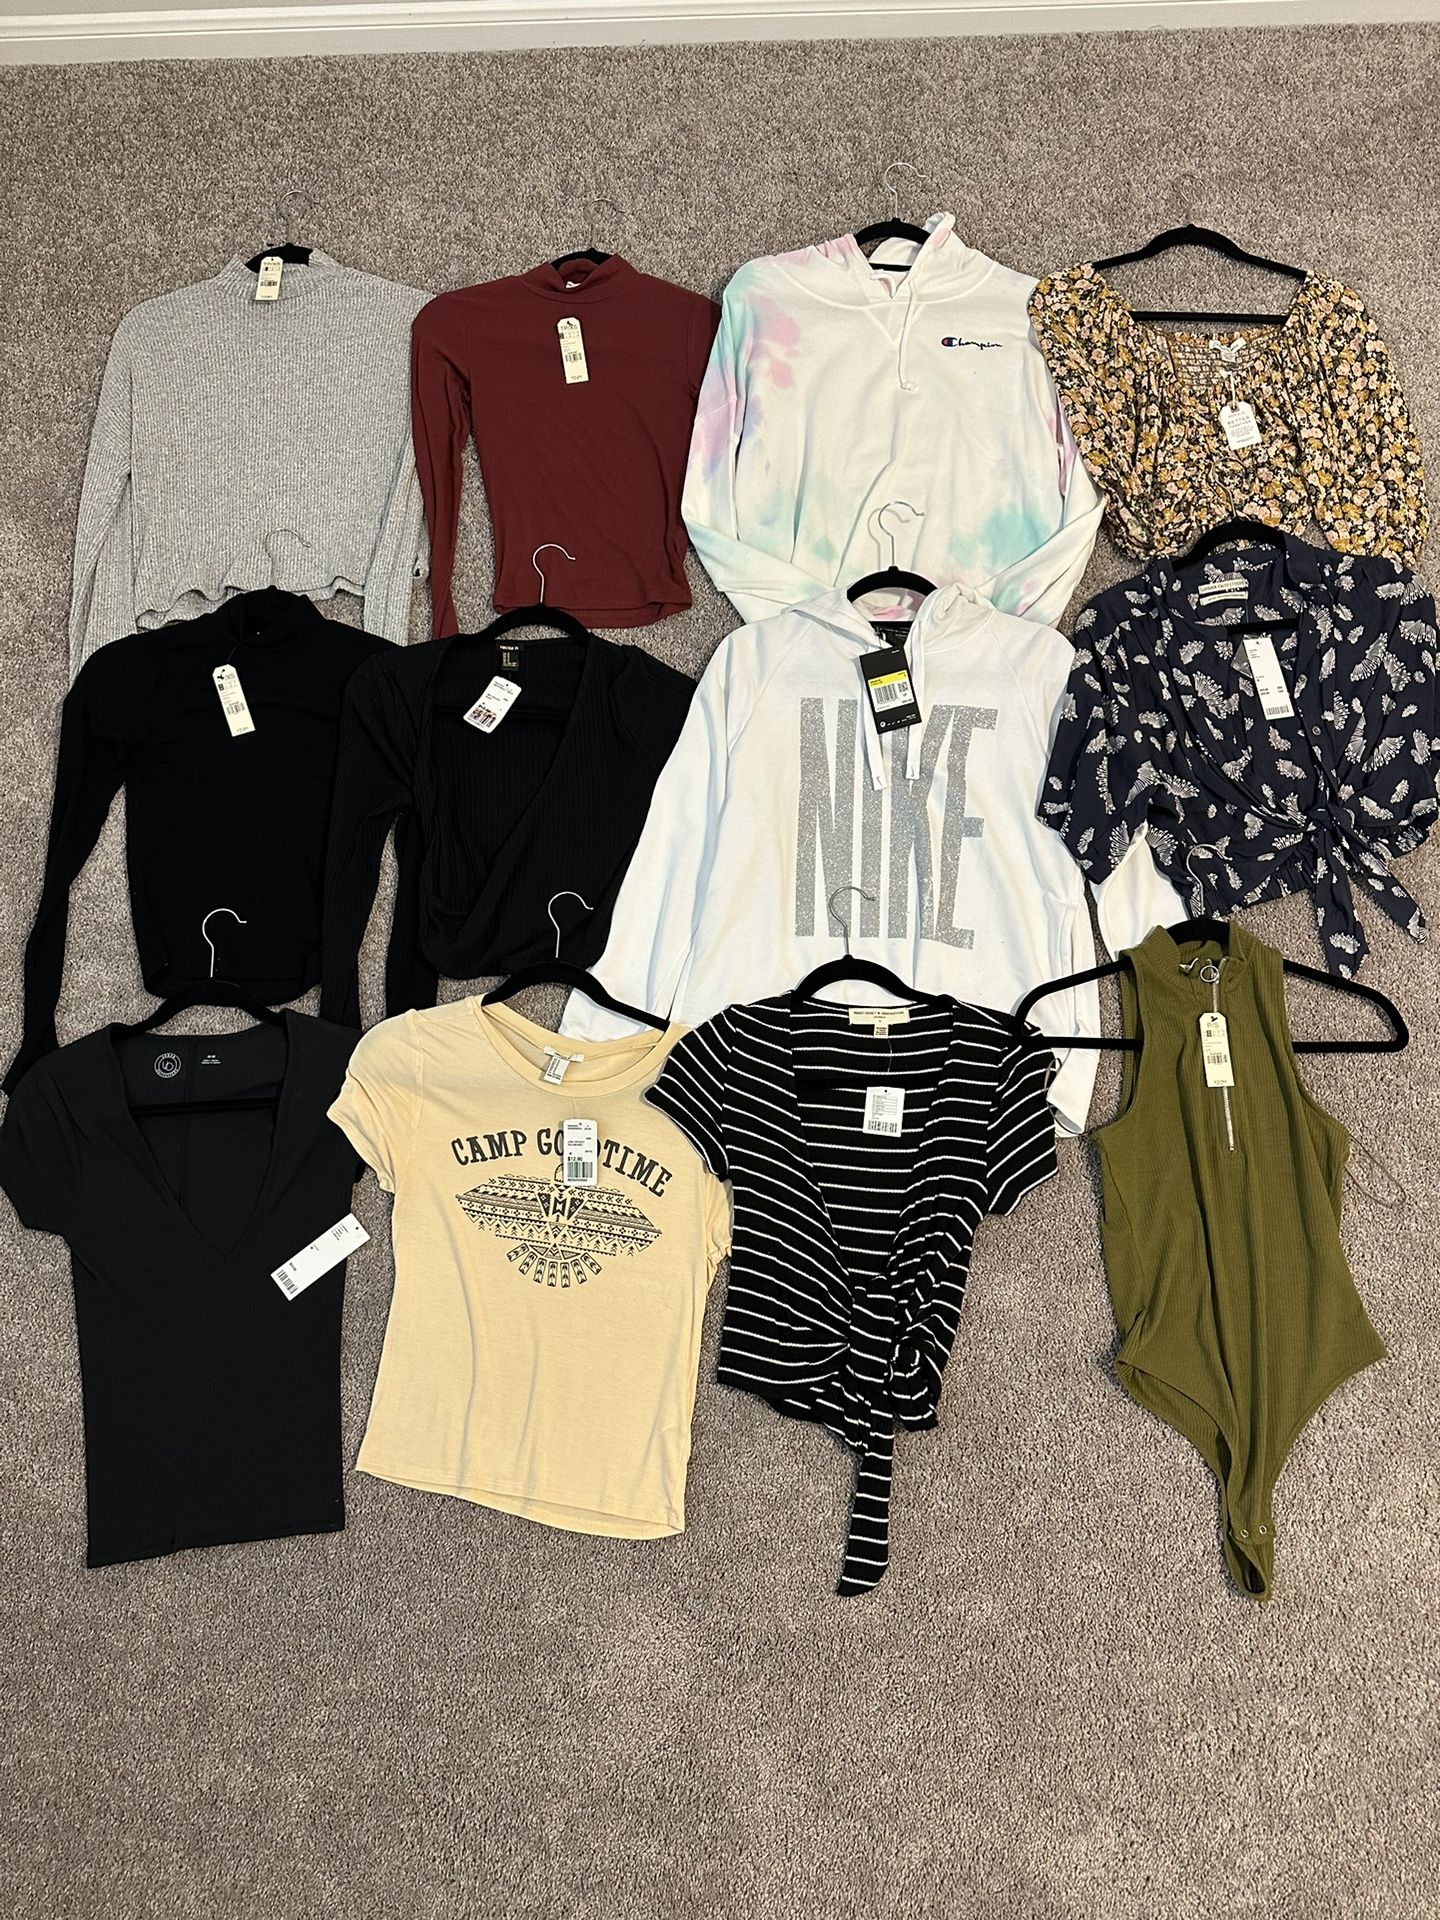 Womens clothes 